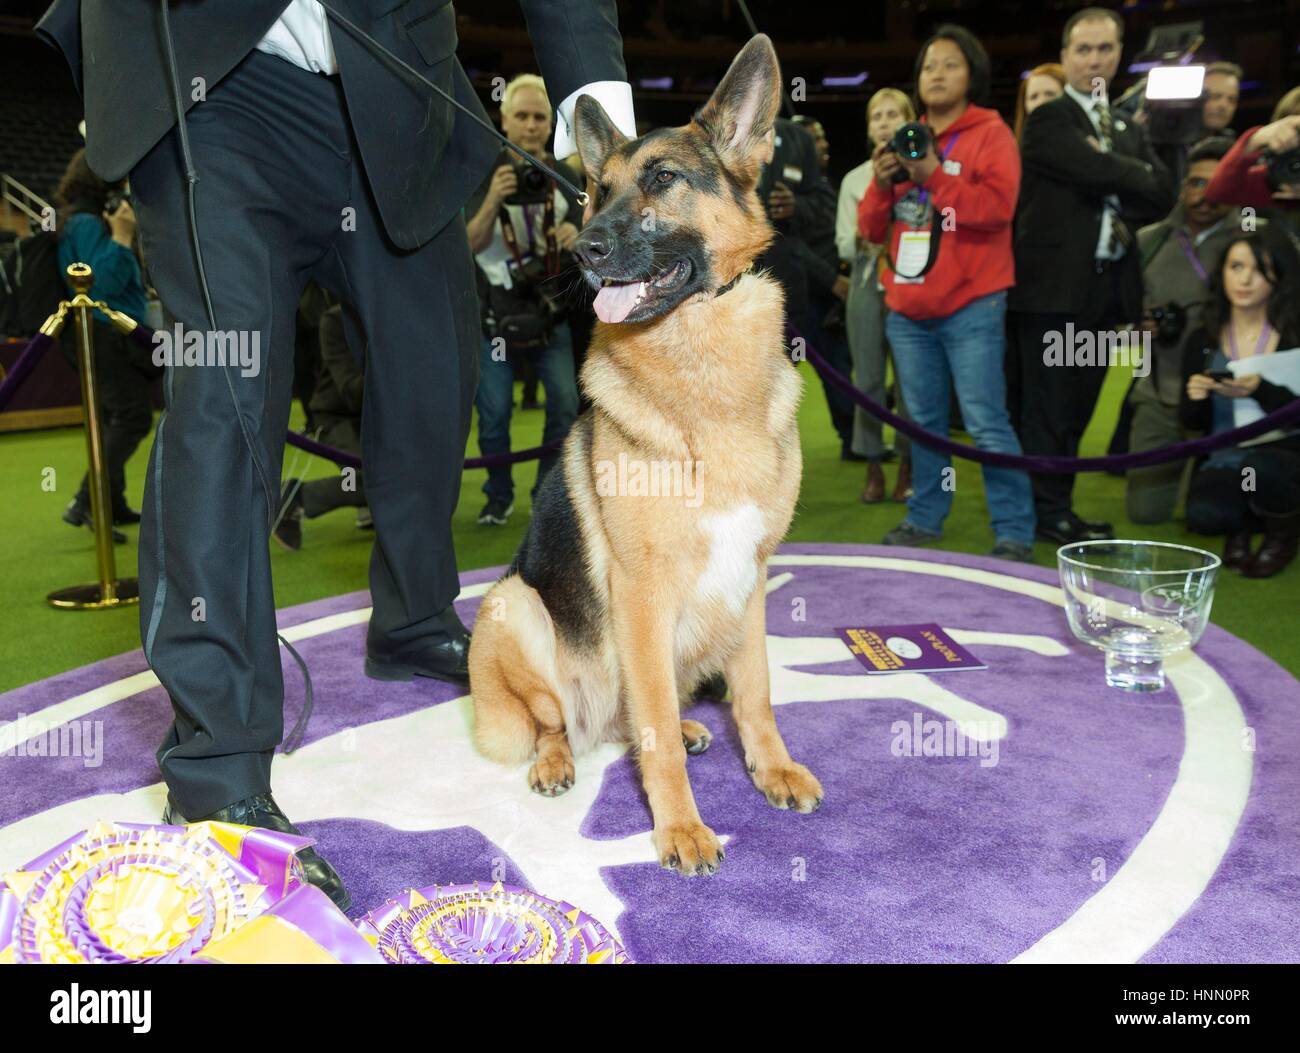 New York, NY, USA. 14th Feb, 2017. Rumor the German Shepherd and handler Kent Boyles in attendance for 141st Annual Westminster Kennel Club Dog Show Best In Show, Madison Square Garden, New York, NY February 14, 2017. Credit: Lev Radin/Everett Collection/Alamy Live News Stock Photo